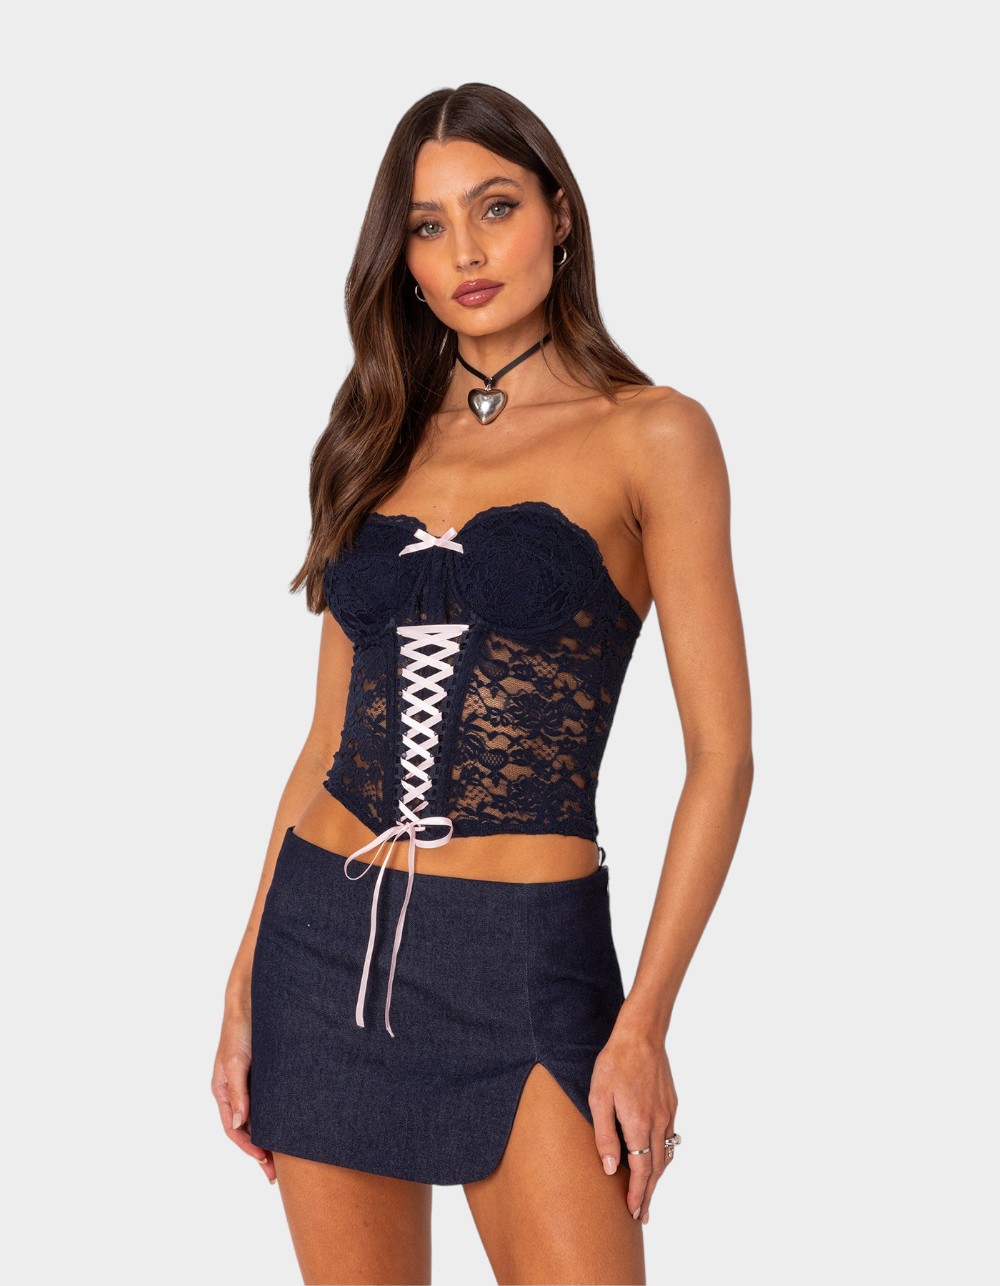 Edikted Women's Picture Perfect Printed Mesh Corset Top